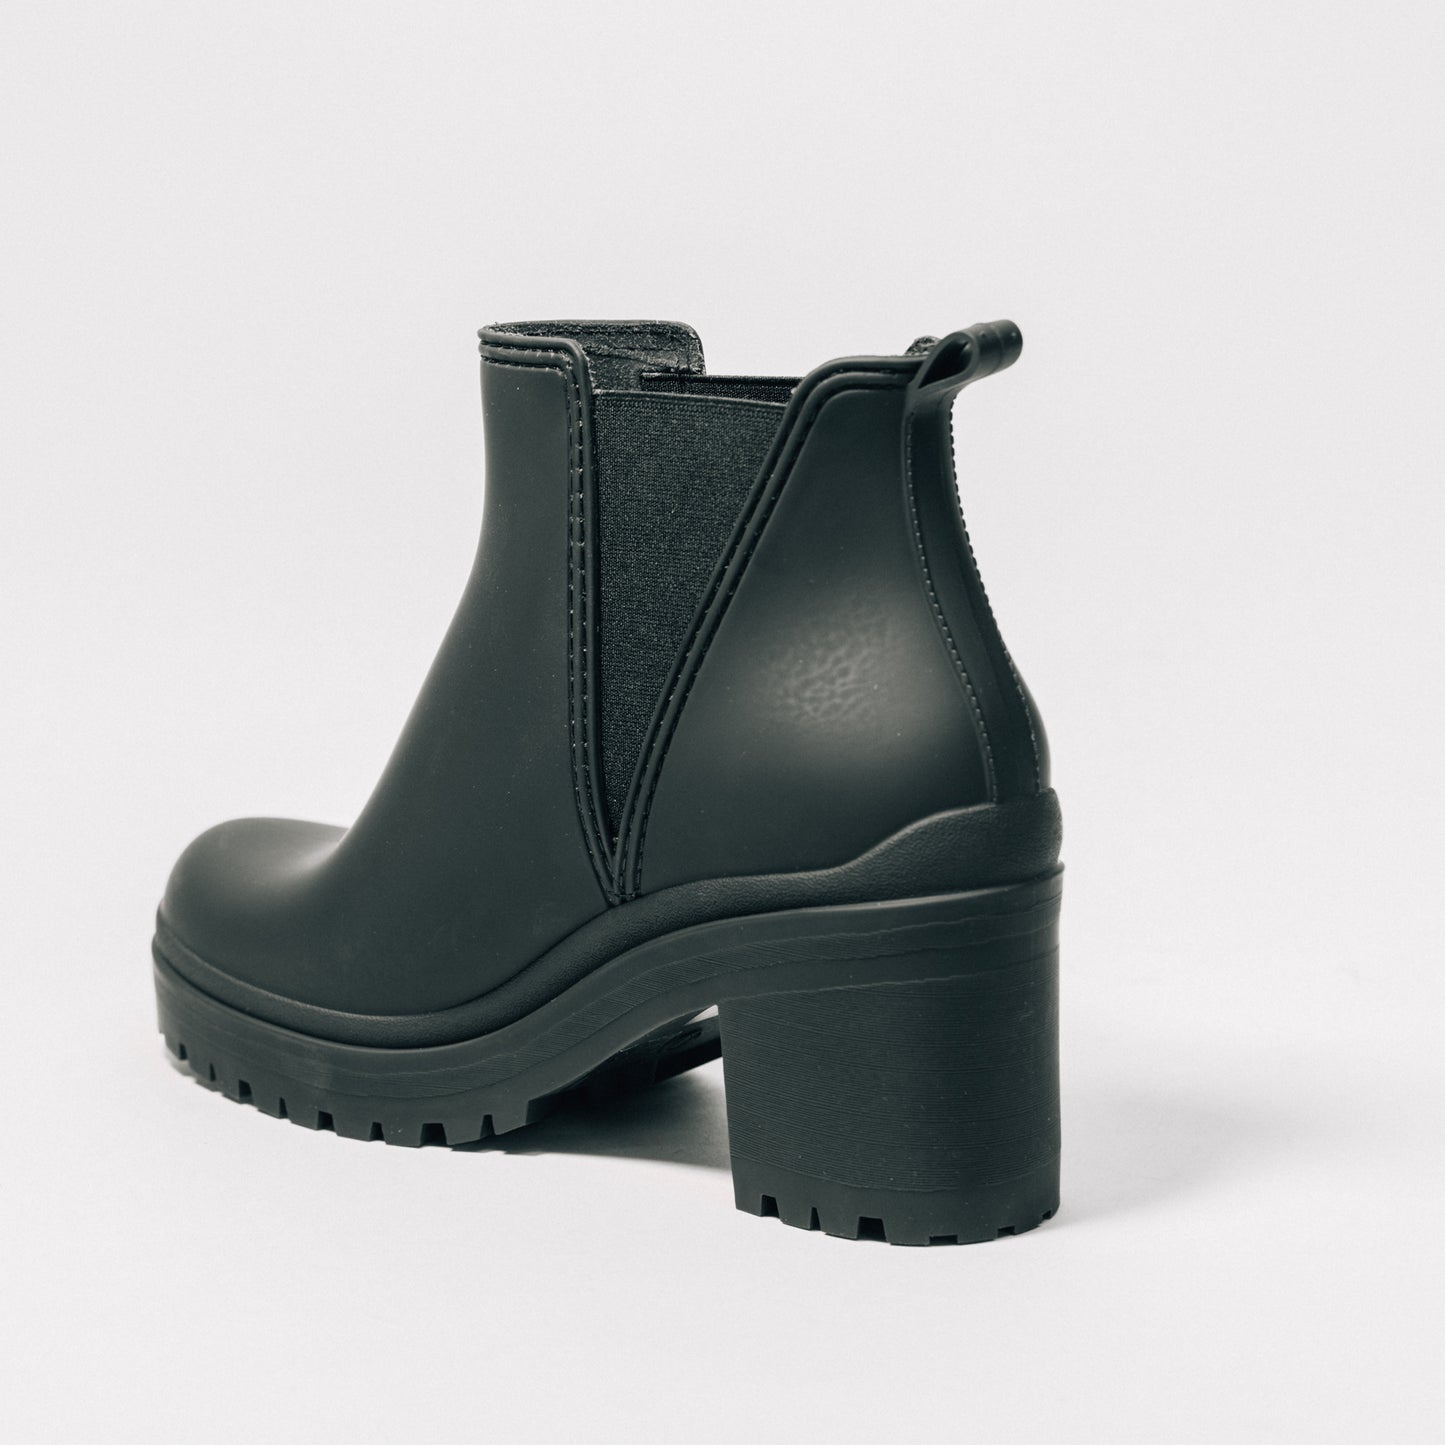 JEFFREY CAMPBELL RAINING - MH ANKLE BOOT